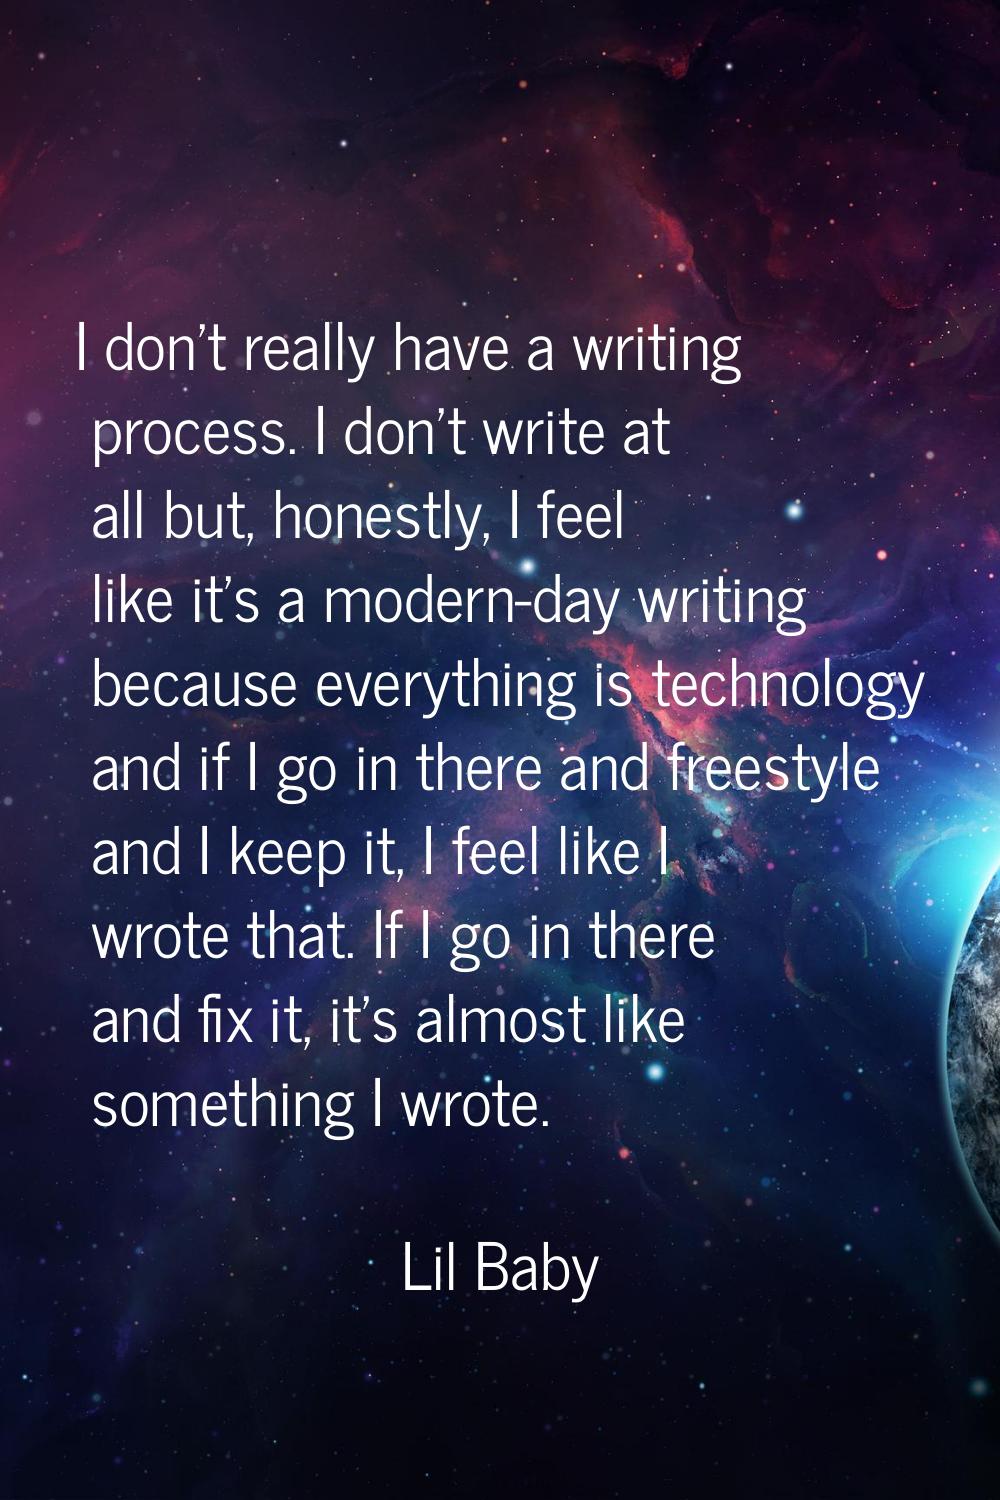 I don't really have a writing process. I don't write at all but, honestly, I feel like it's a moder